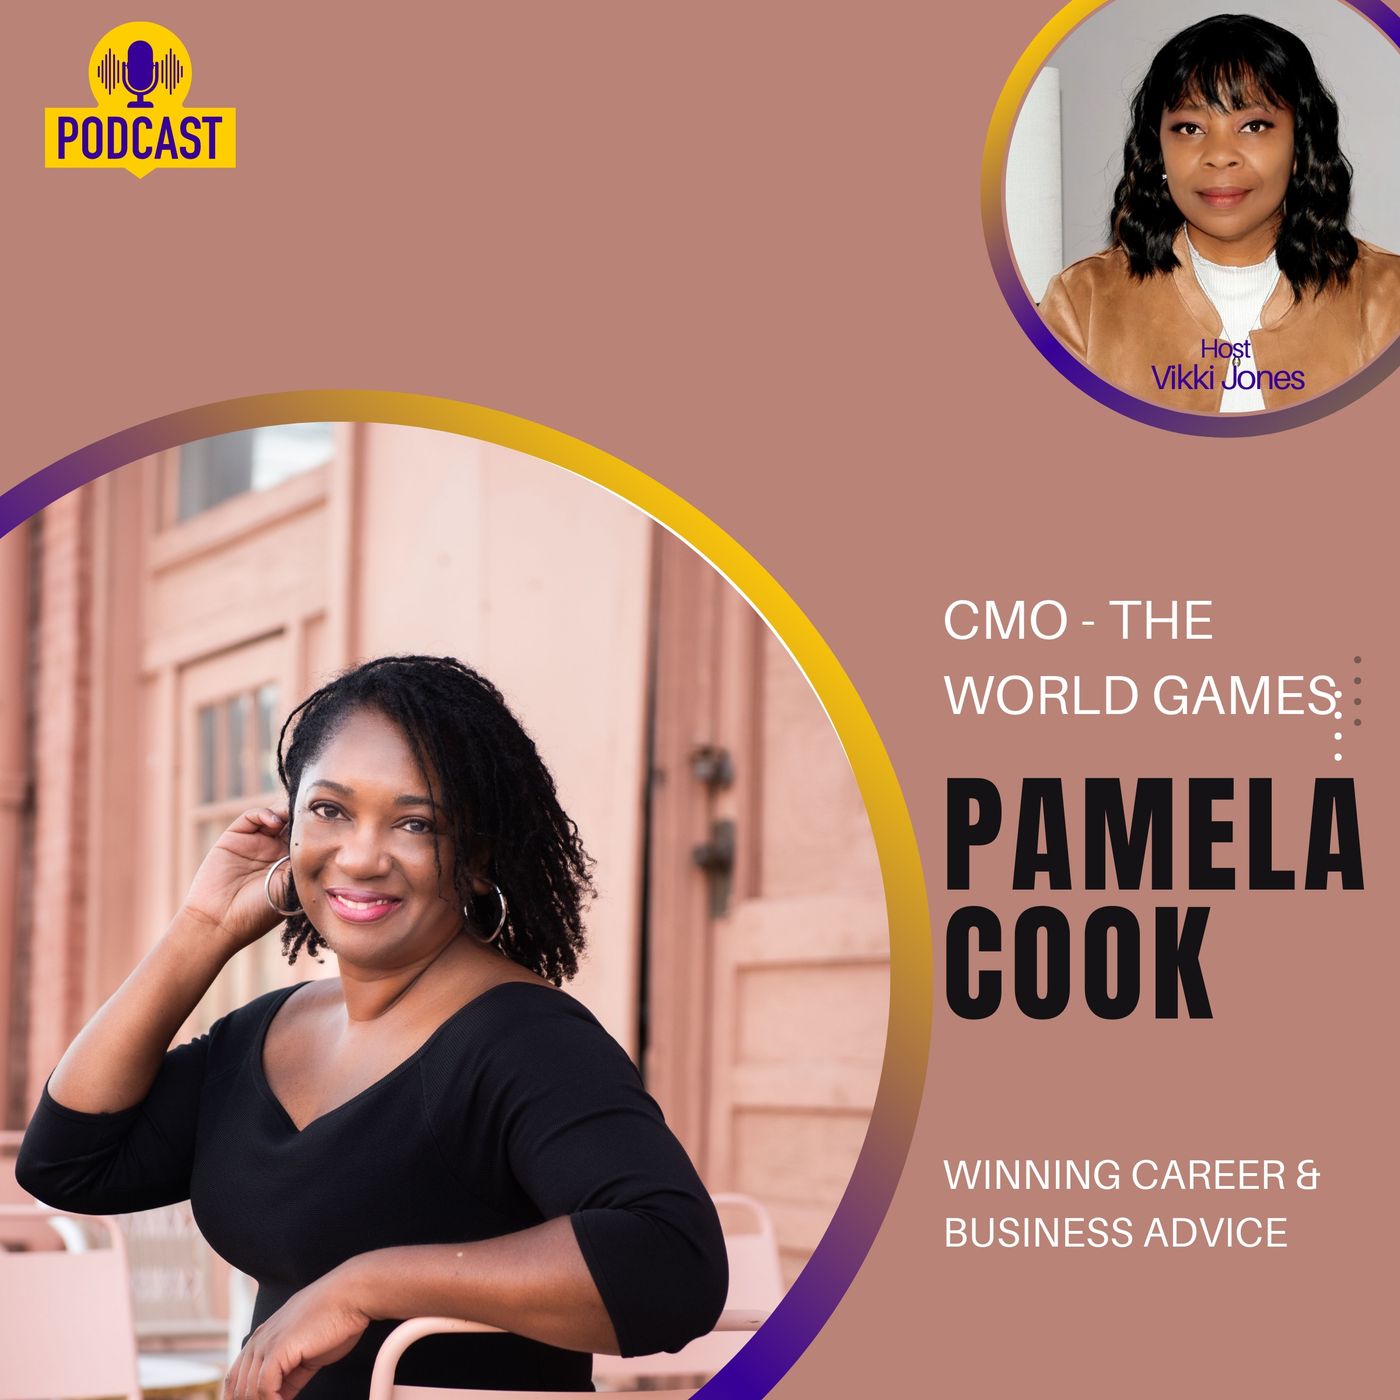 Pamela Cook, Chief Marketing Officer of The World Games Gives Winning Career Advice